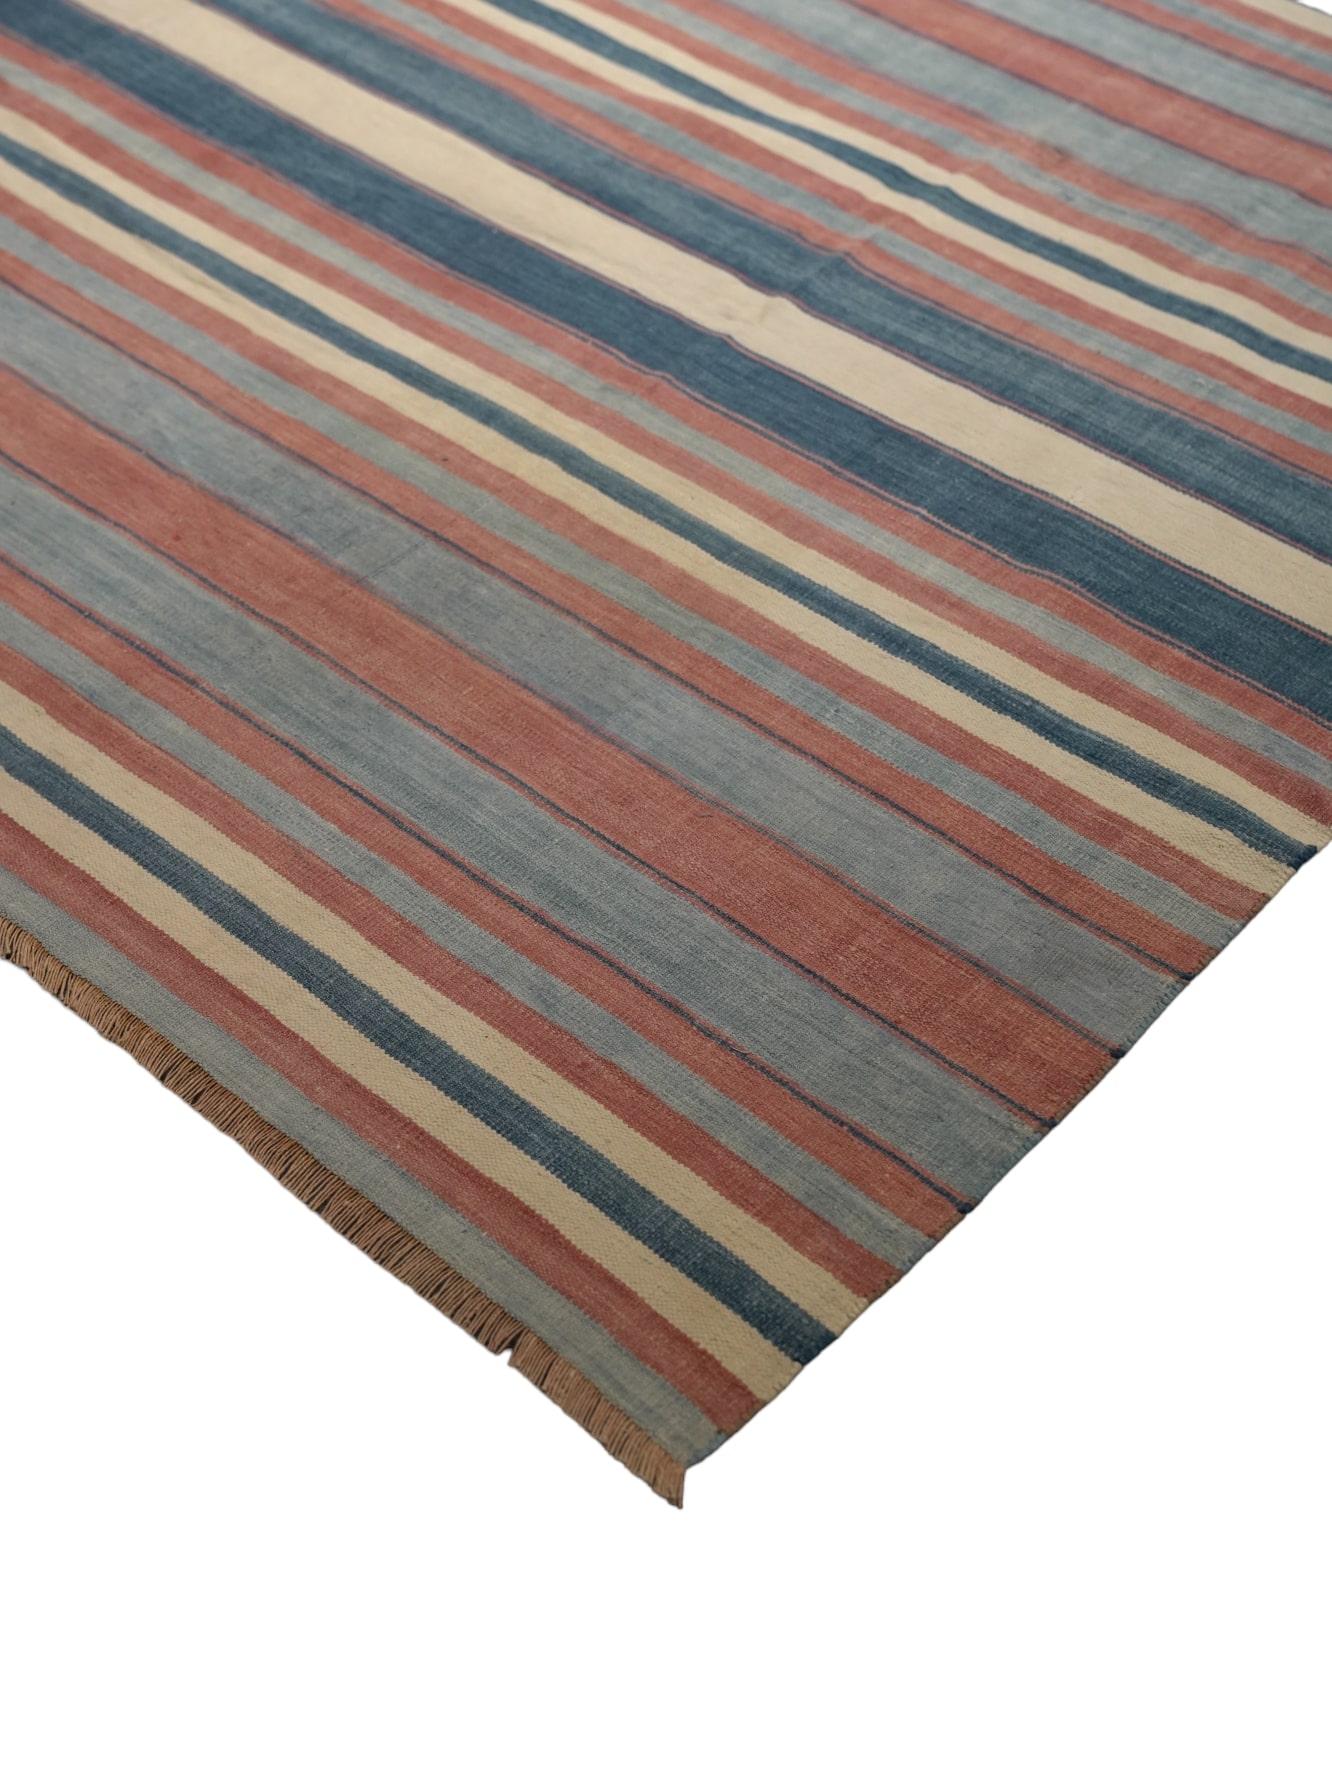 Hand-Woven Vintage Dhurrie Rug with Polychromatic Stripes, from Rug & Kilim For Sale